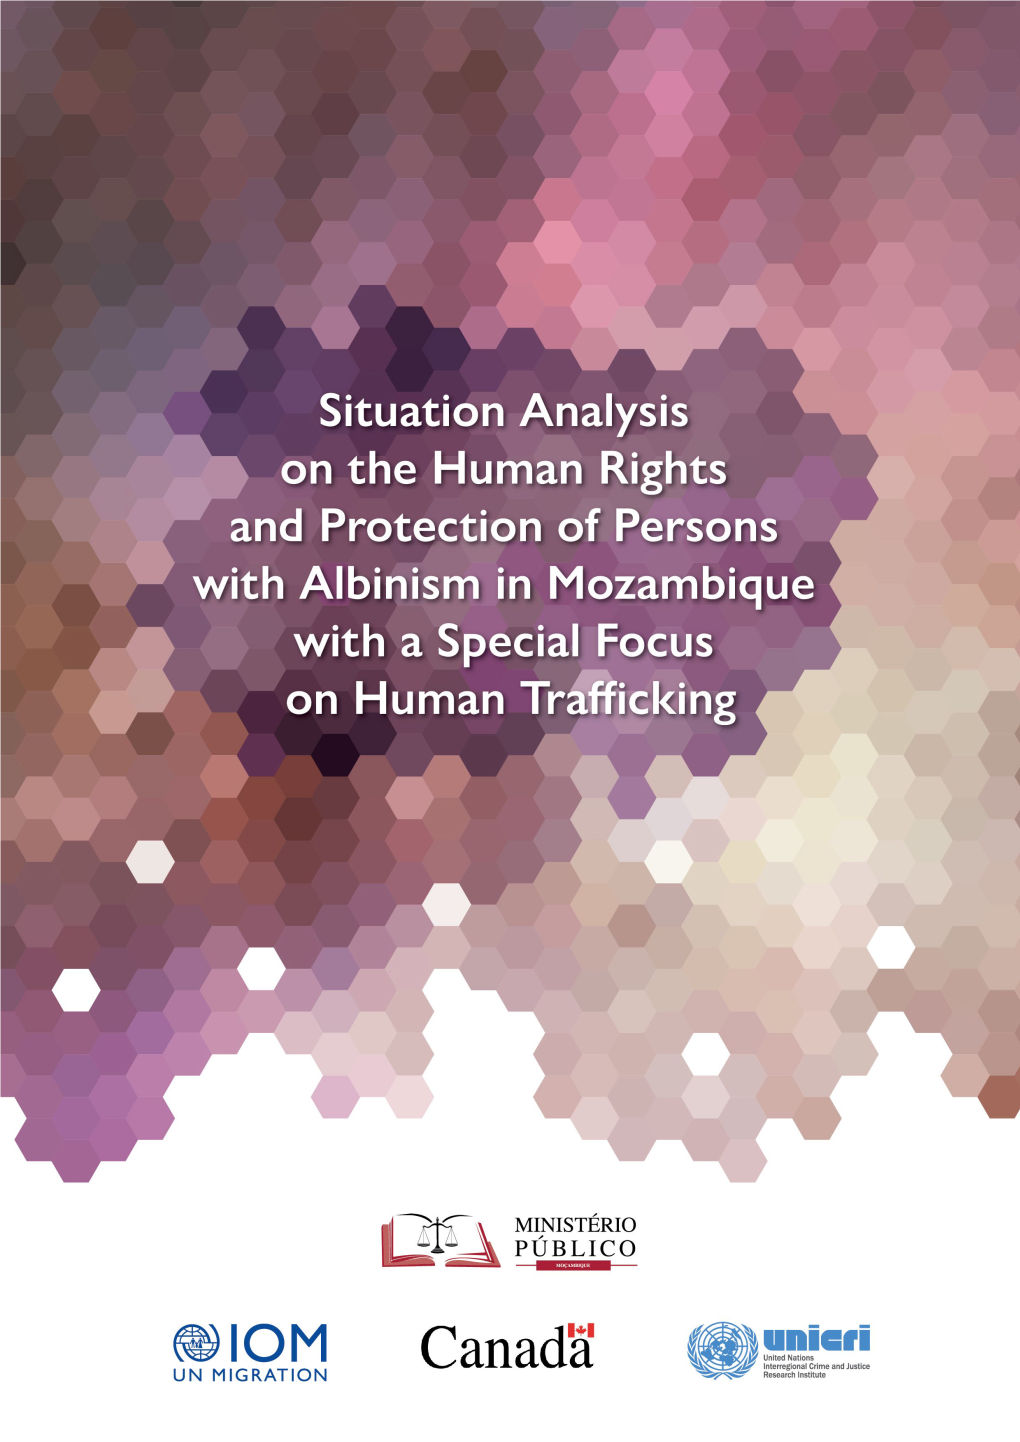 Situation Analysis on the Human Rights and Protection of Persons Iii with Albinism in Mozambique with a Special Focus on Human Trafficking